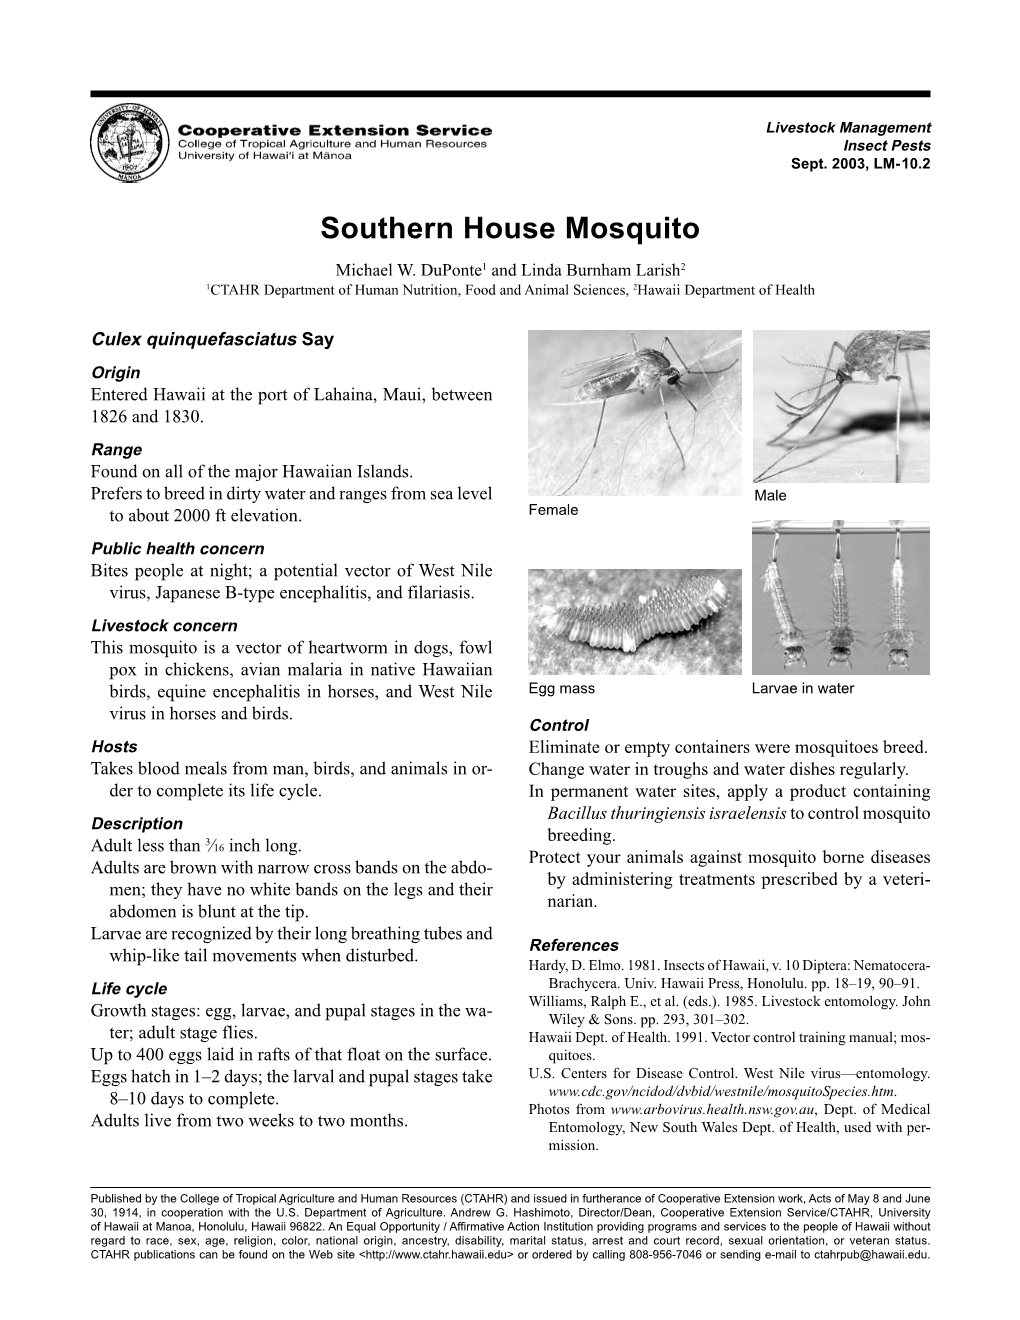 Southern House Mosquito Michael W